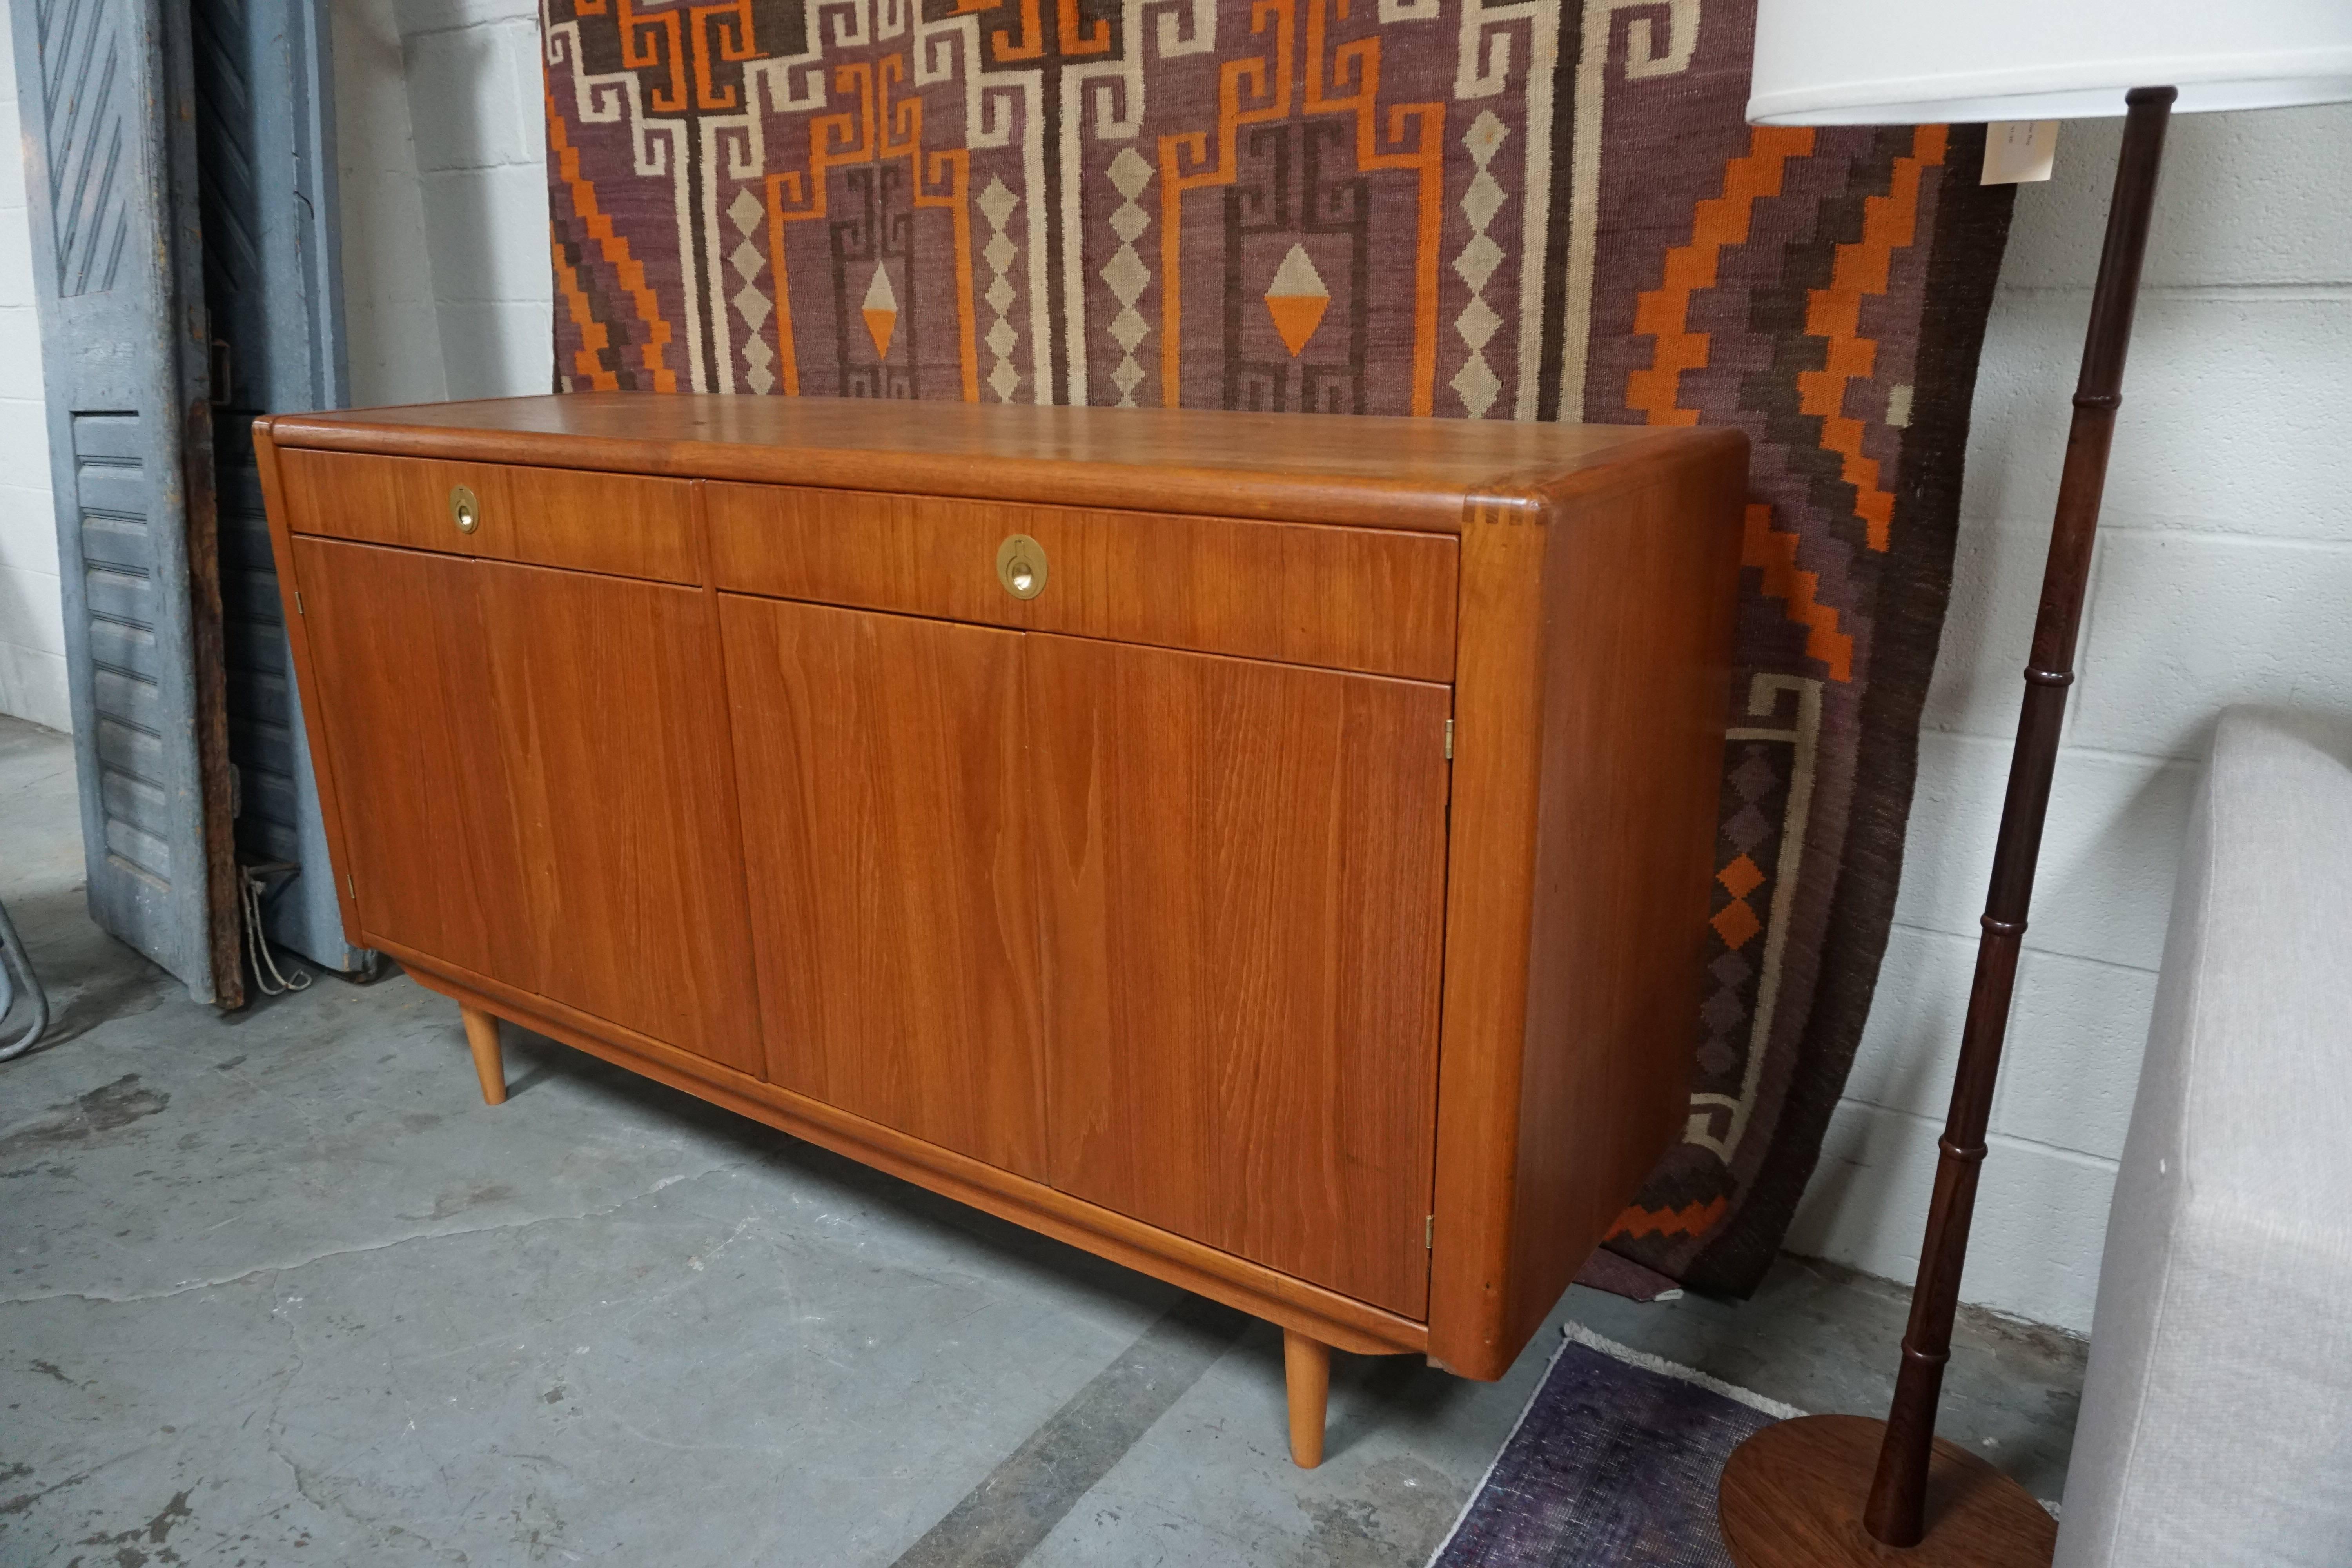 Beautiful Danish midcentury stained walnut credenza with operable doors and cabinets. With original brushed brass hardware and push latches at cabinet doors. Features rounded finger joints at corners and pencil legs.